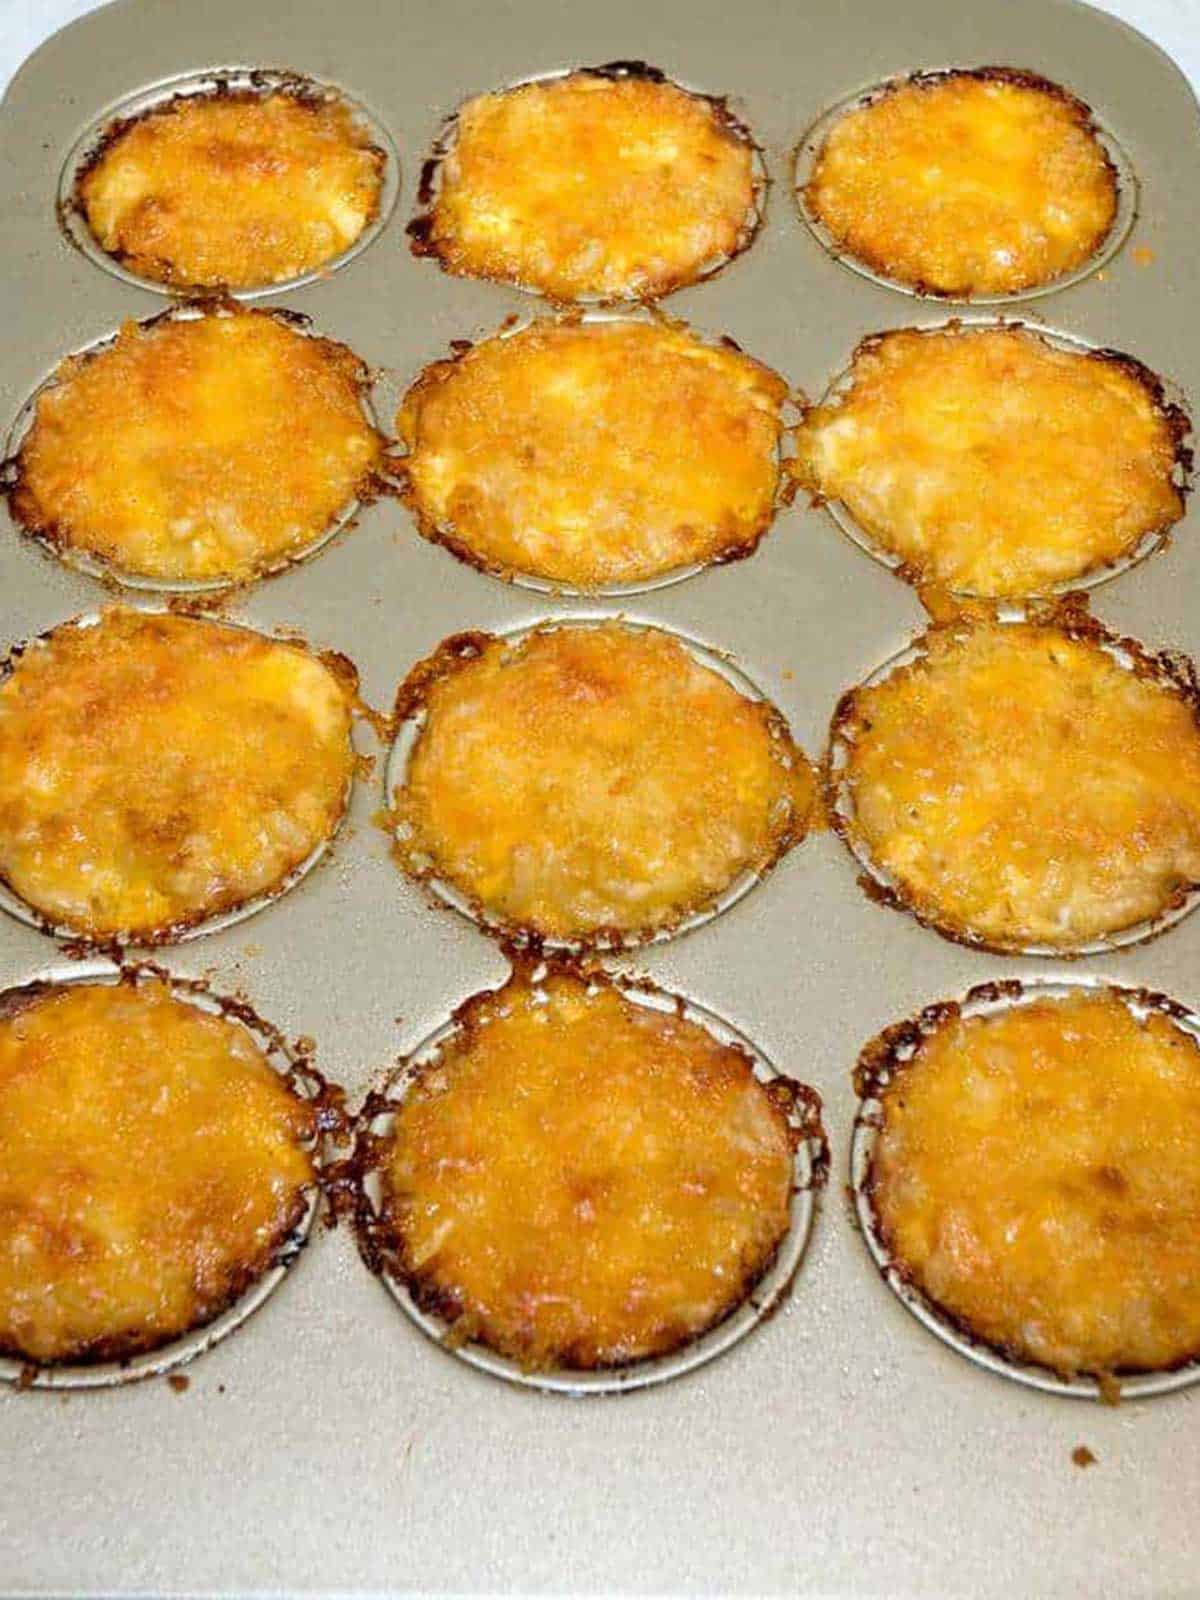 Mac and cheese cups out of the oven.